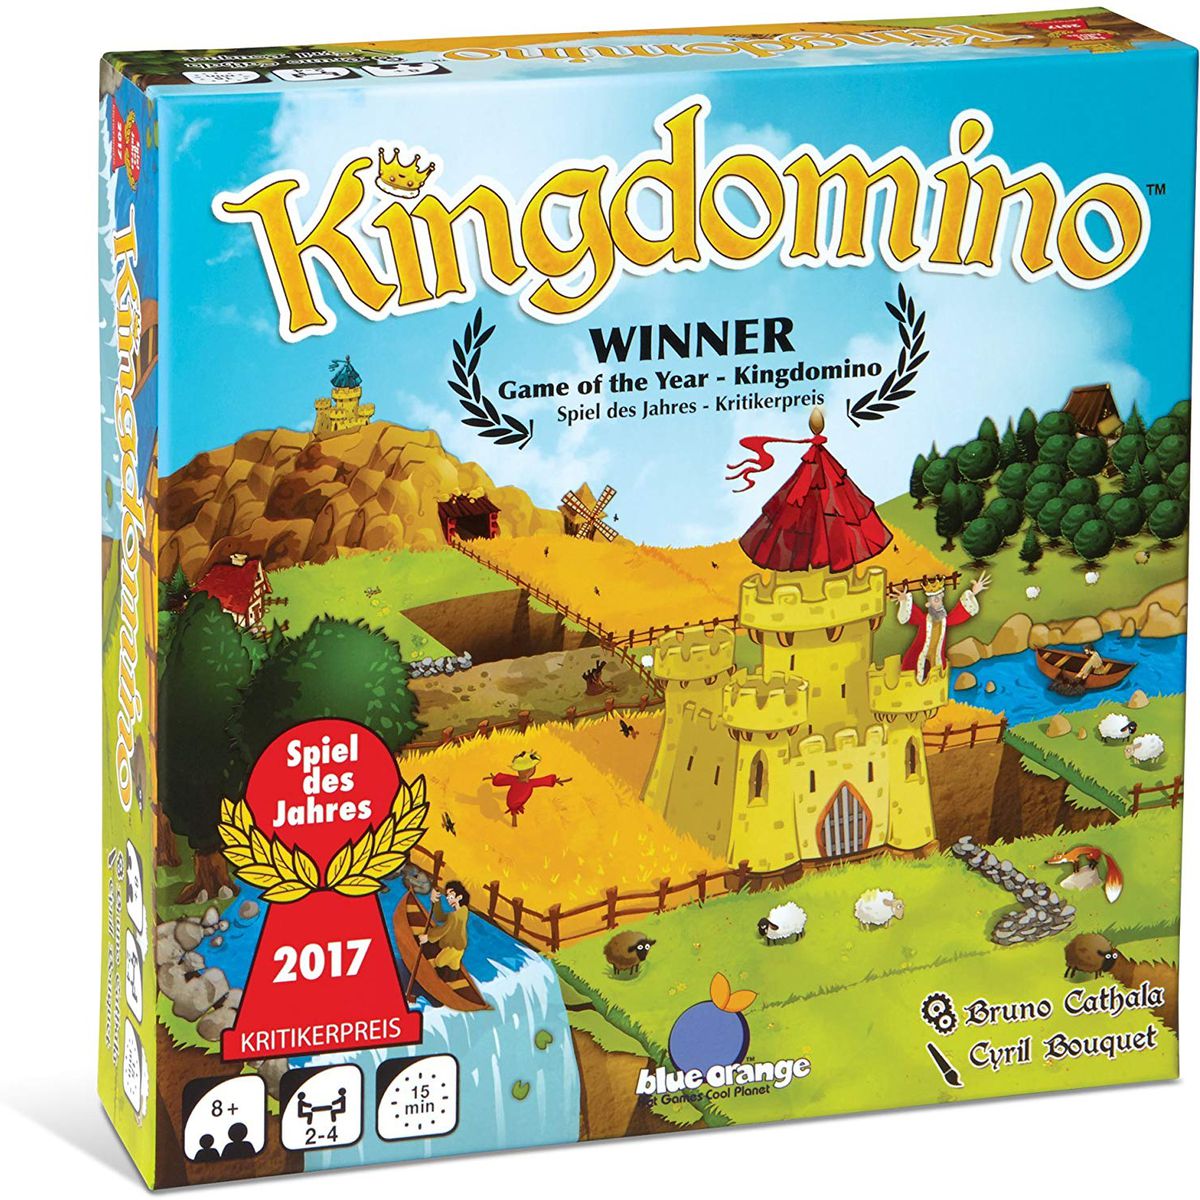 Product shot of the box art for Kingdomino